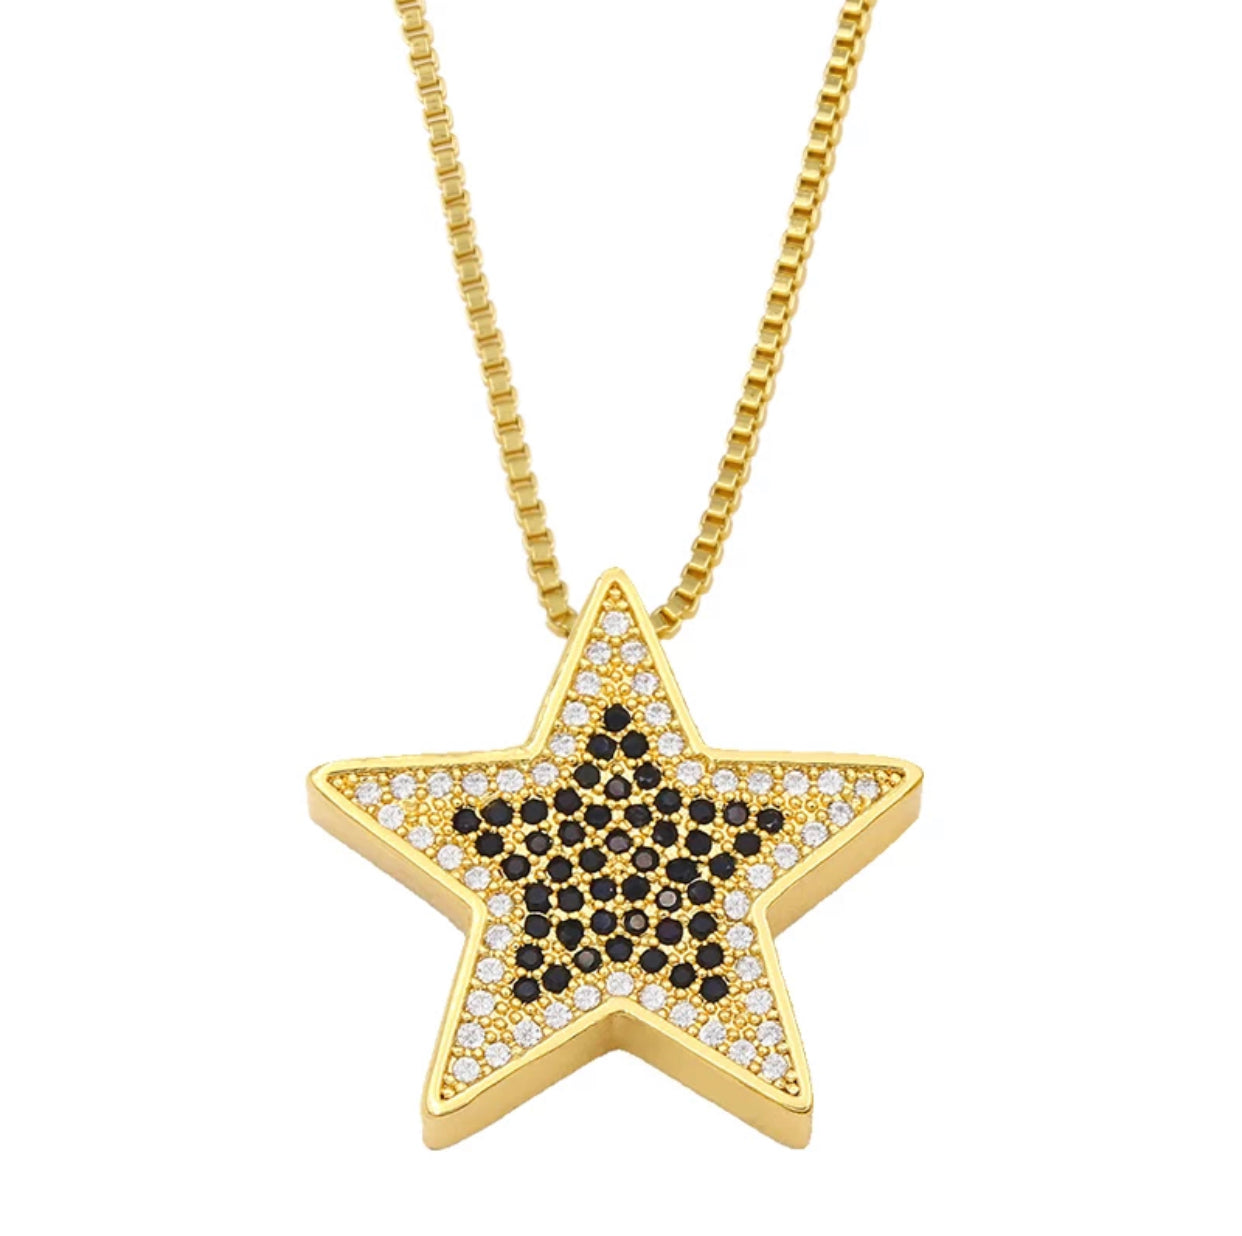 Gold Plated necklace features a gold star embellished with black pave crystals